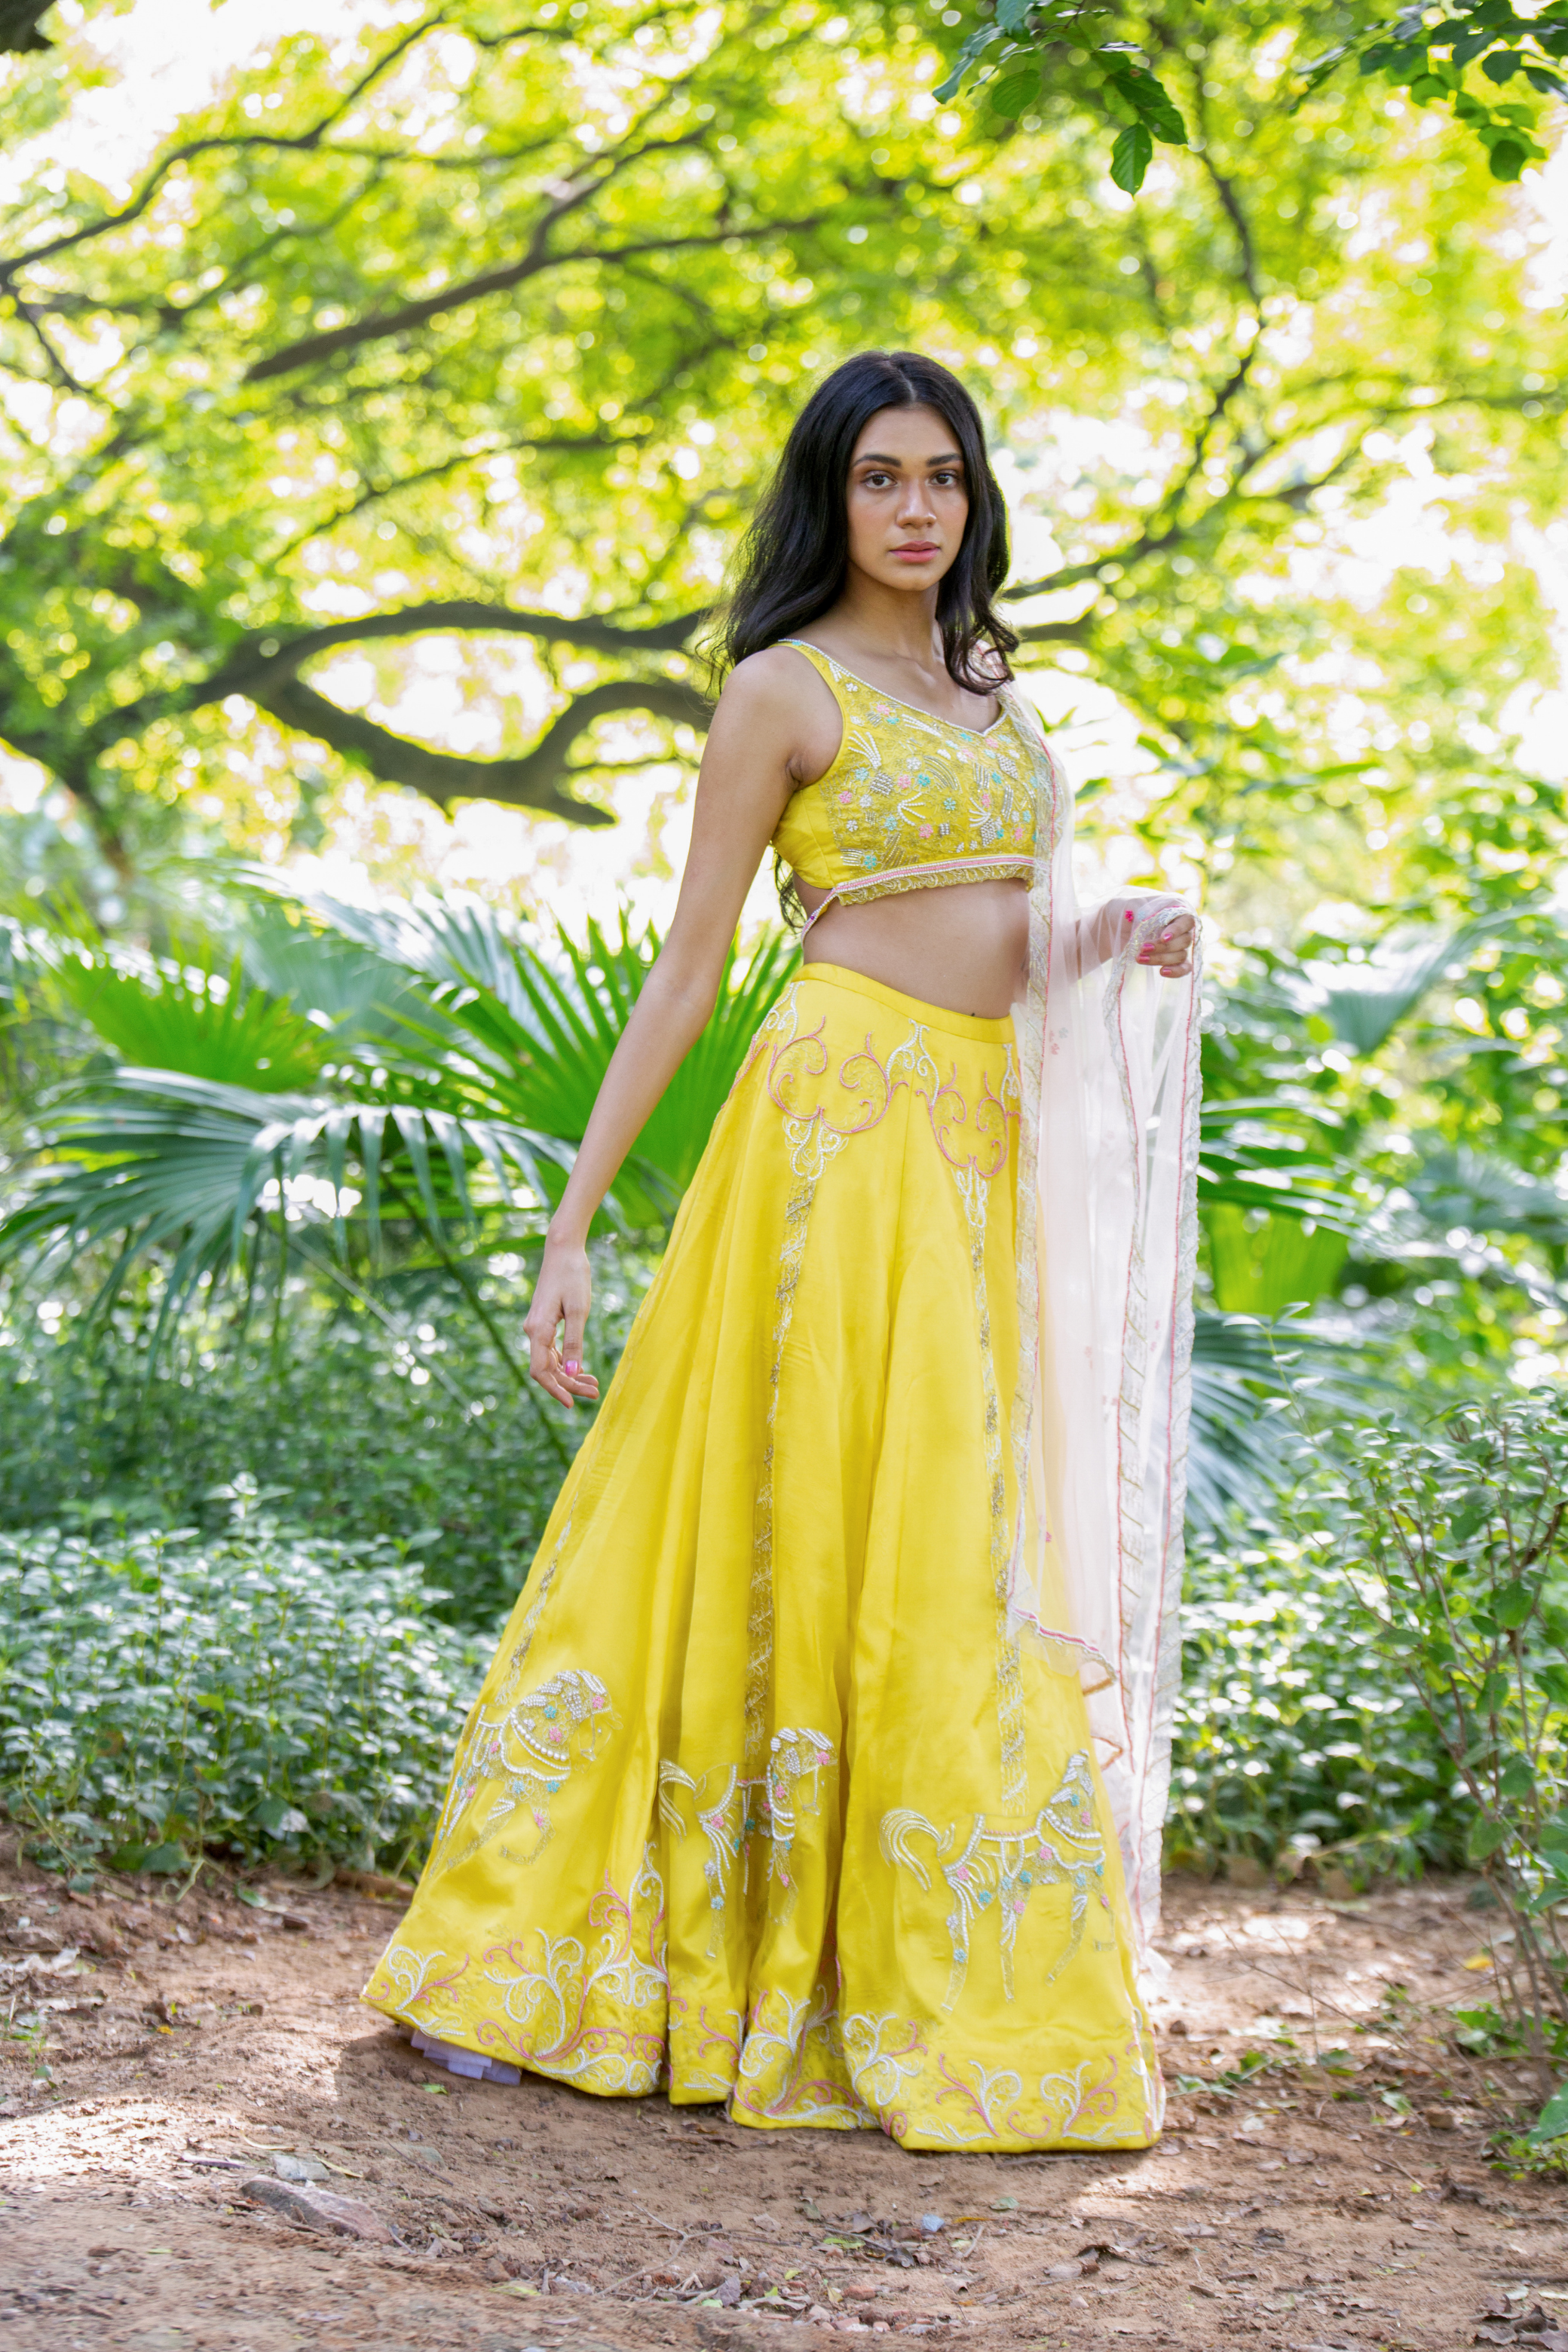 This yellow set features a horse motif embroidered skirt